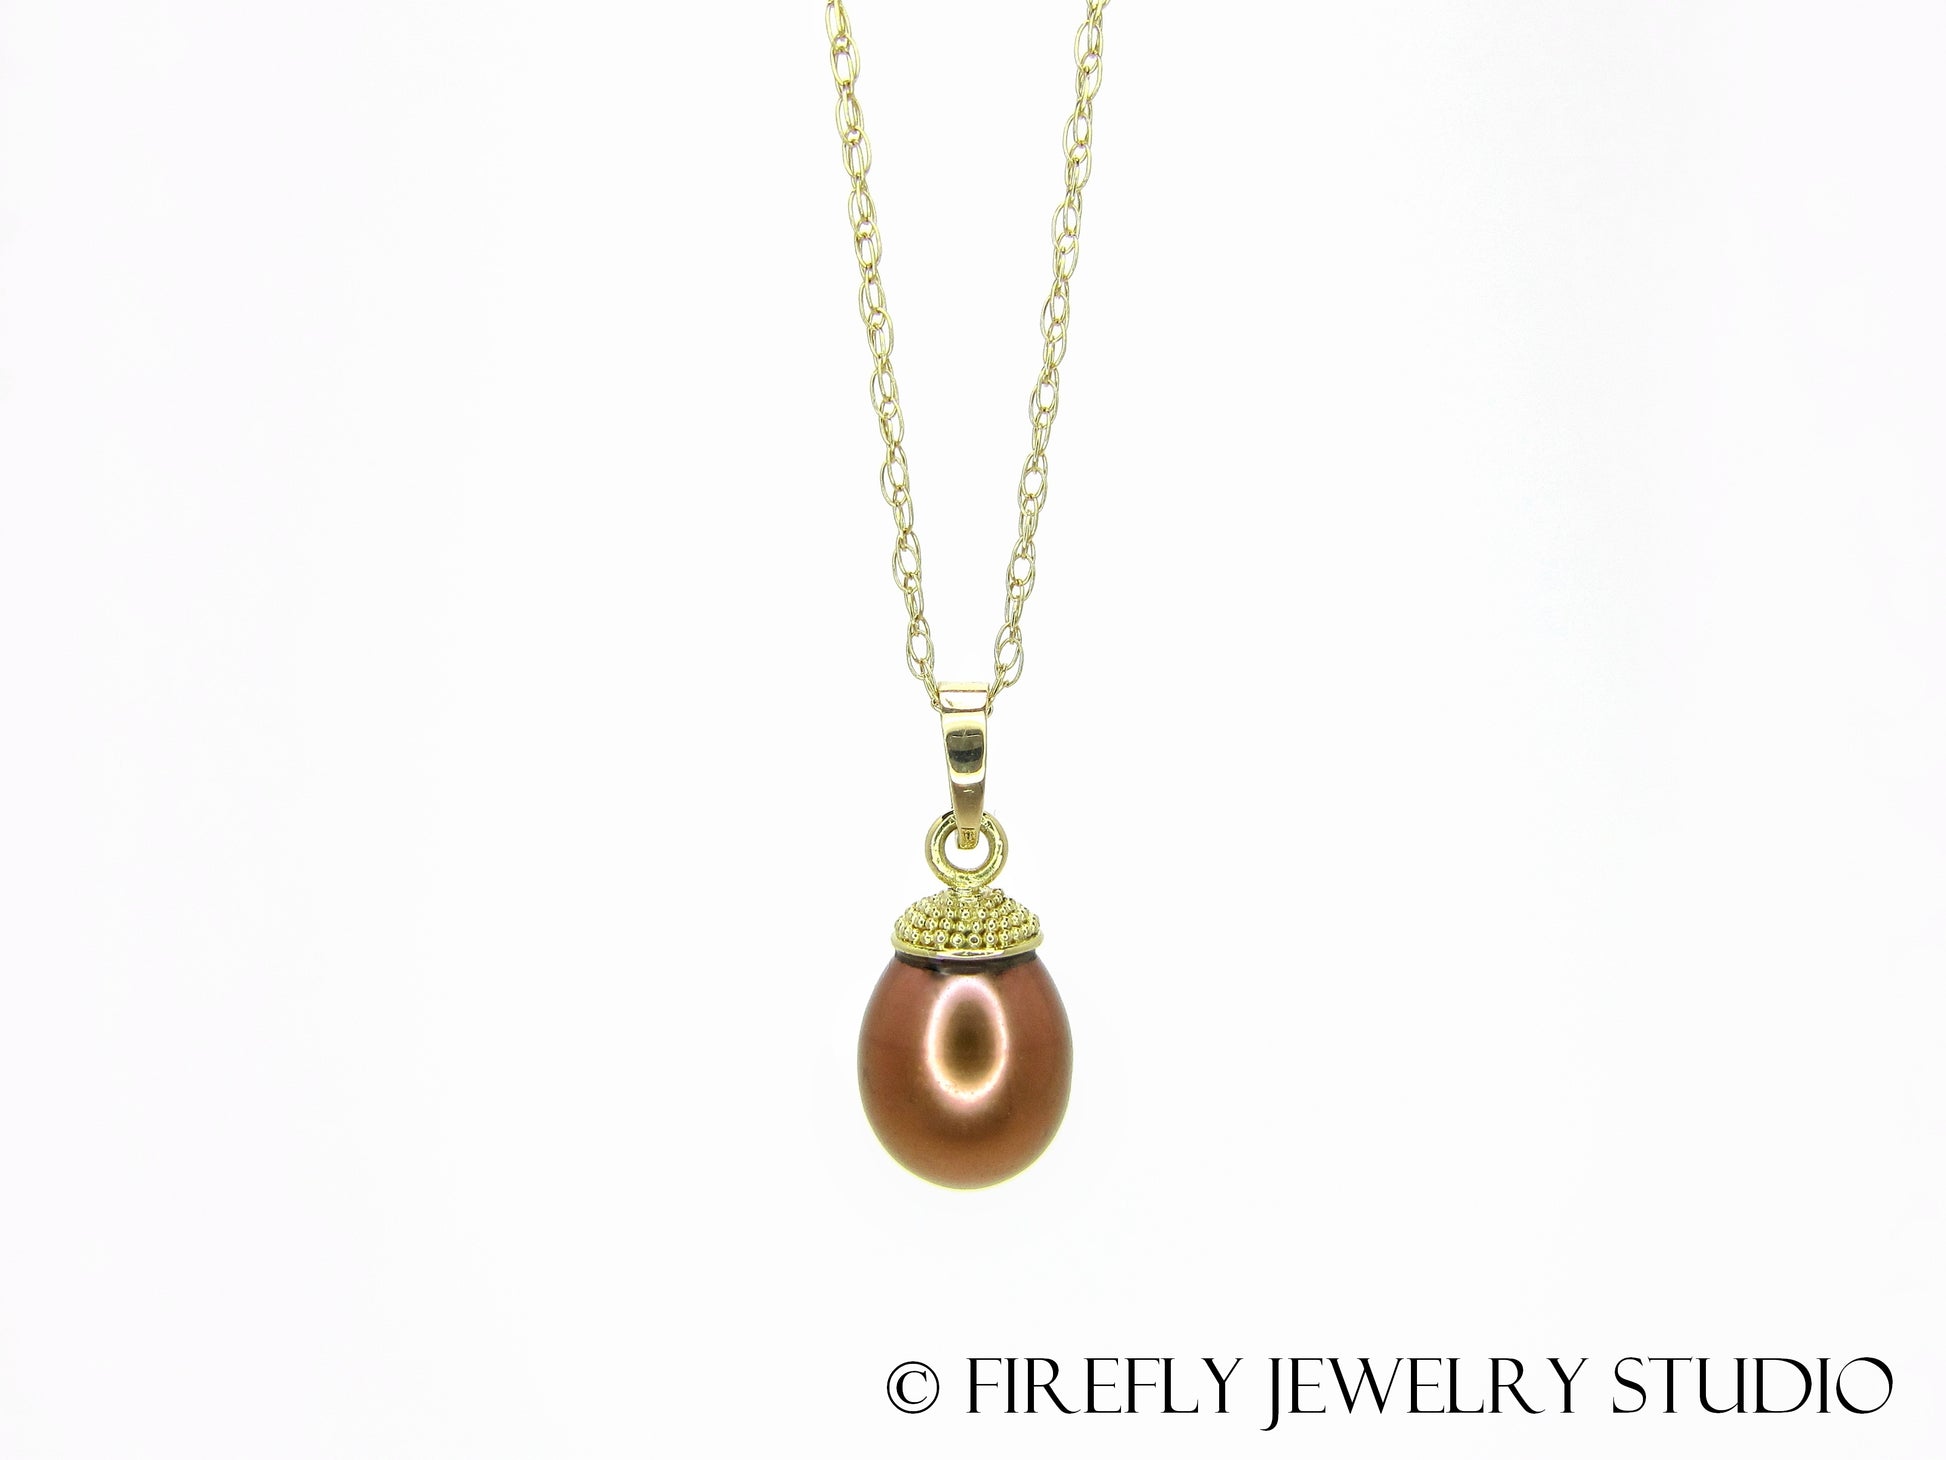 Copper Pearl Acorn Necklace in 18k Yellow Gold - Firefly Jewelry Studio